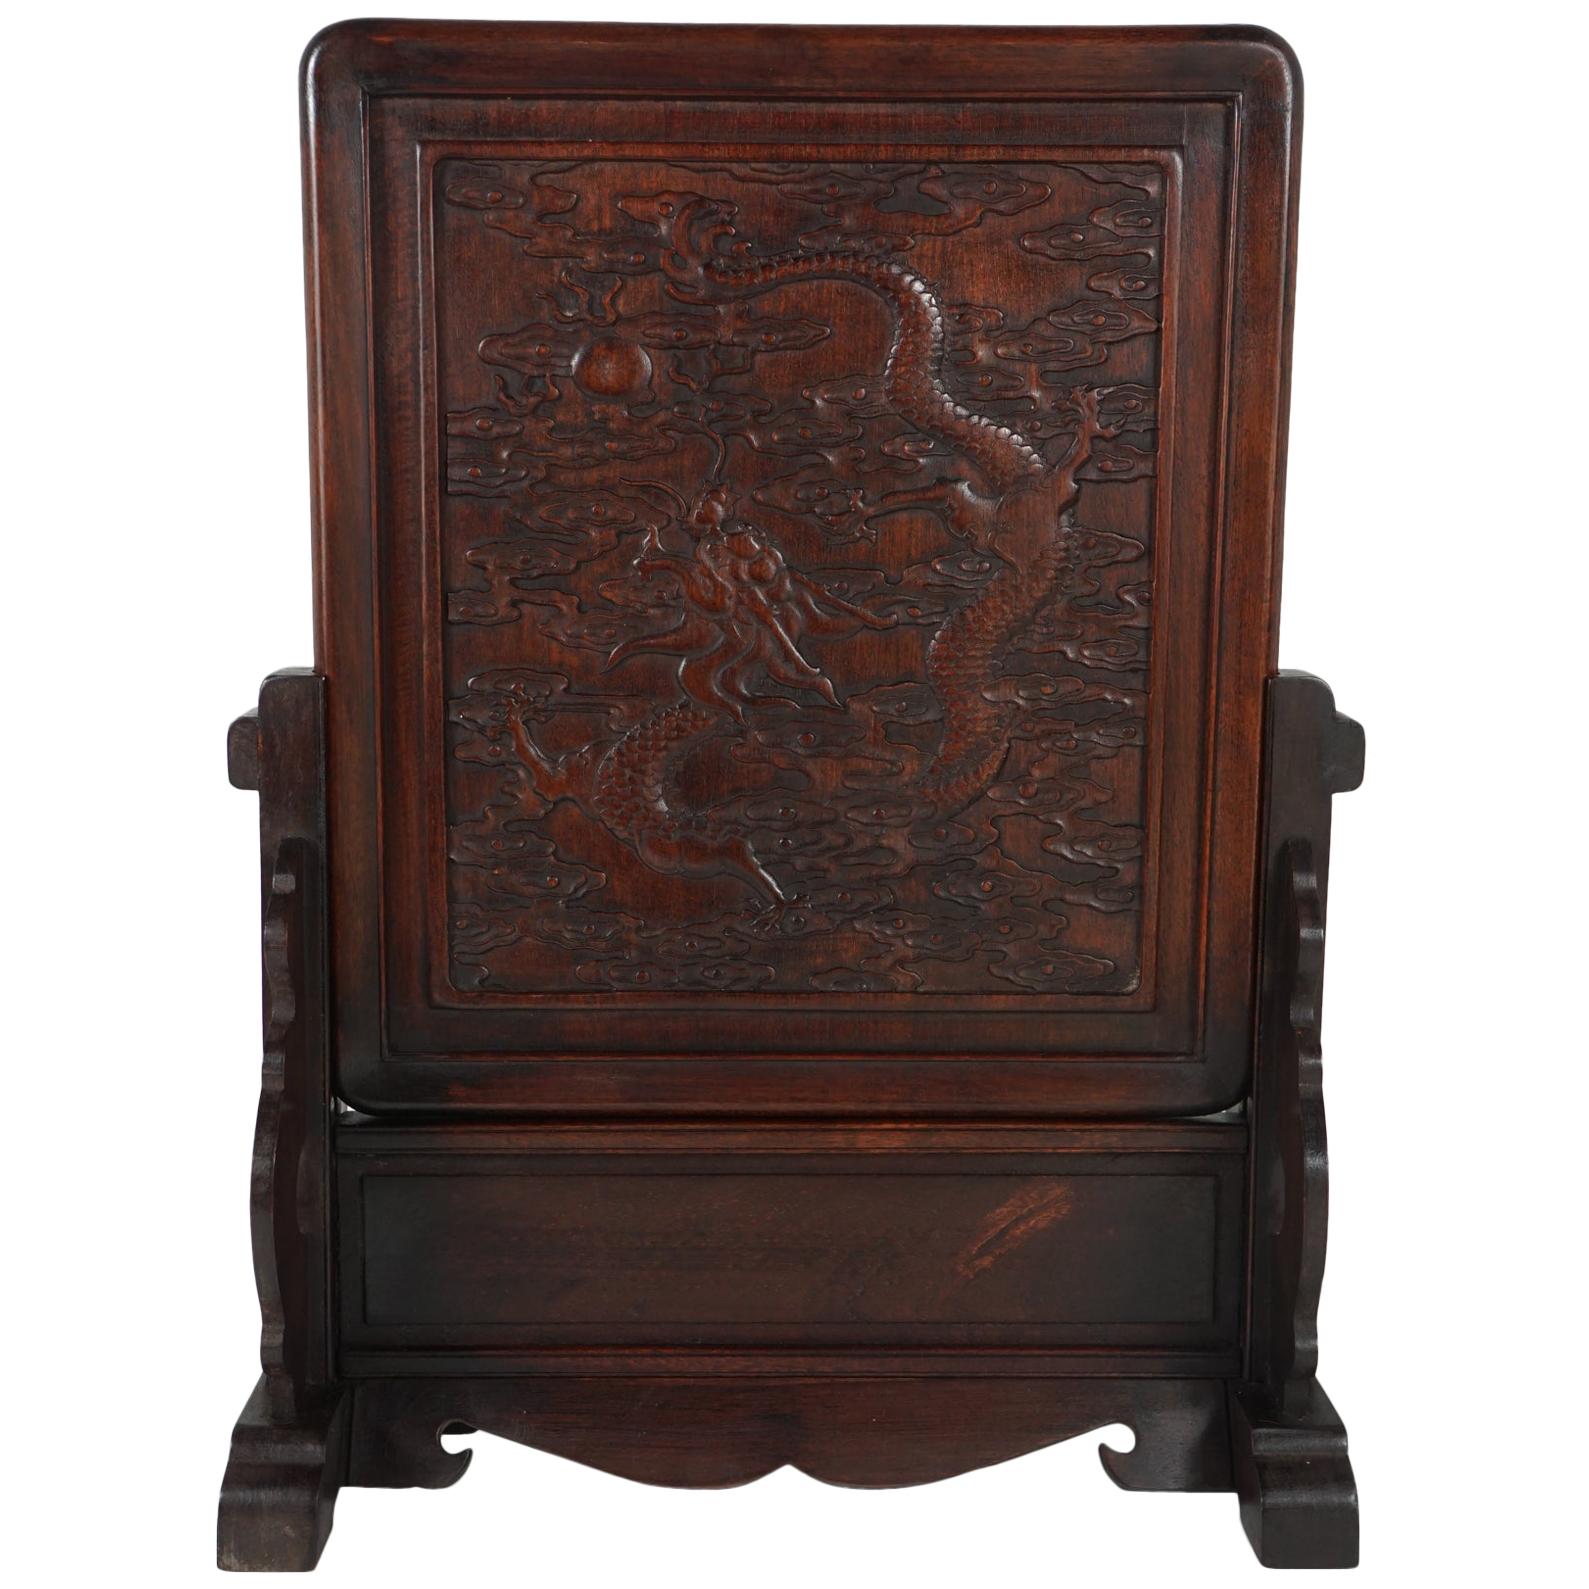 19th Century Chinese Qing Dynasty Carved Rosewood Table Screen